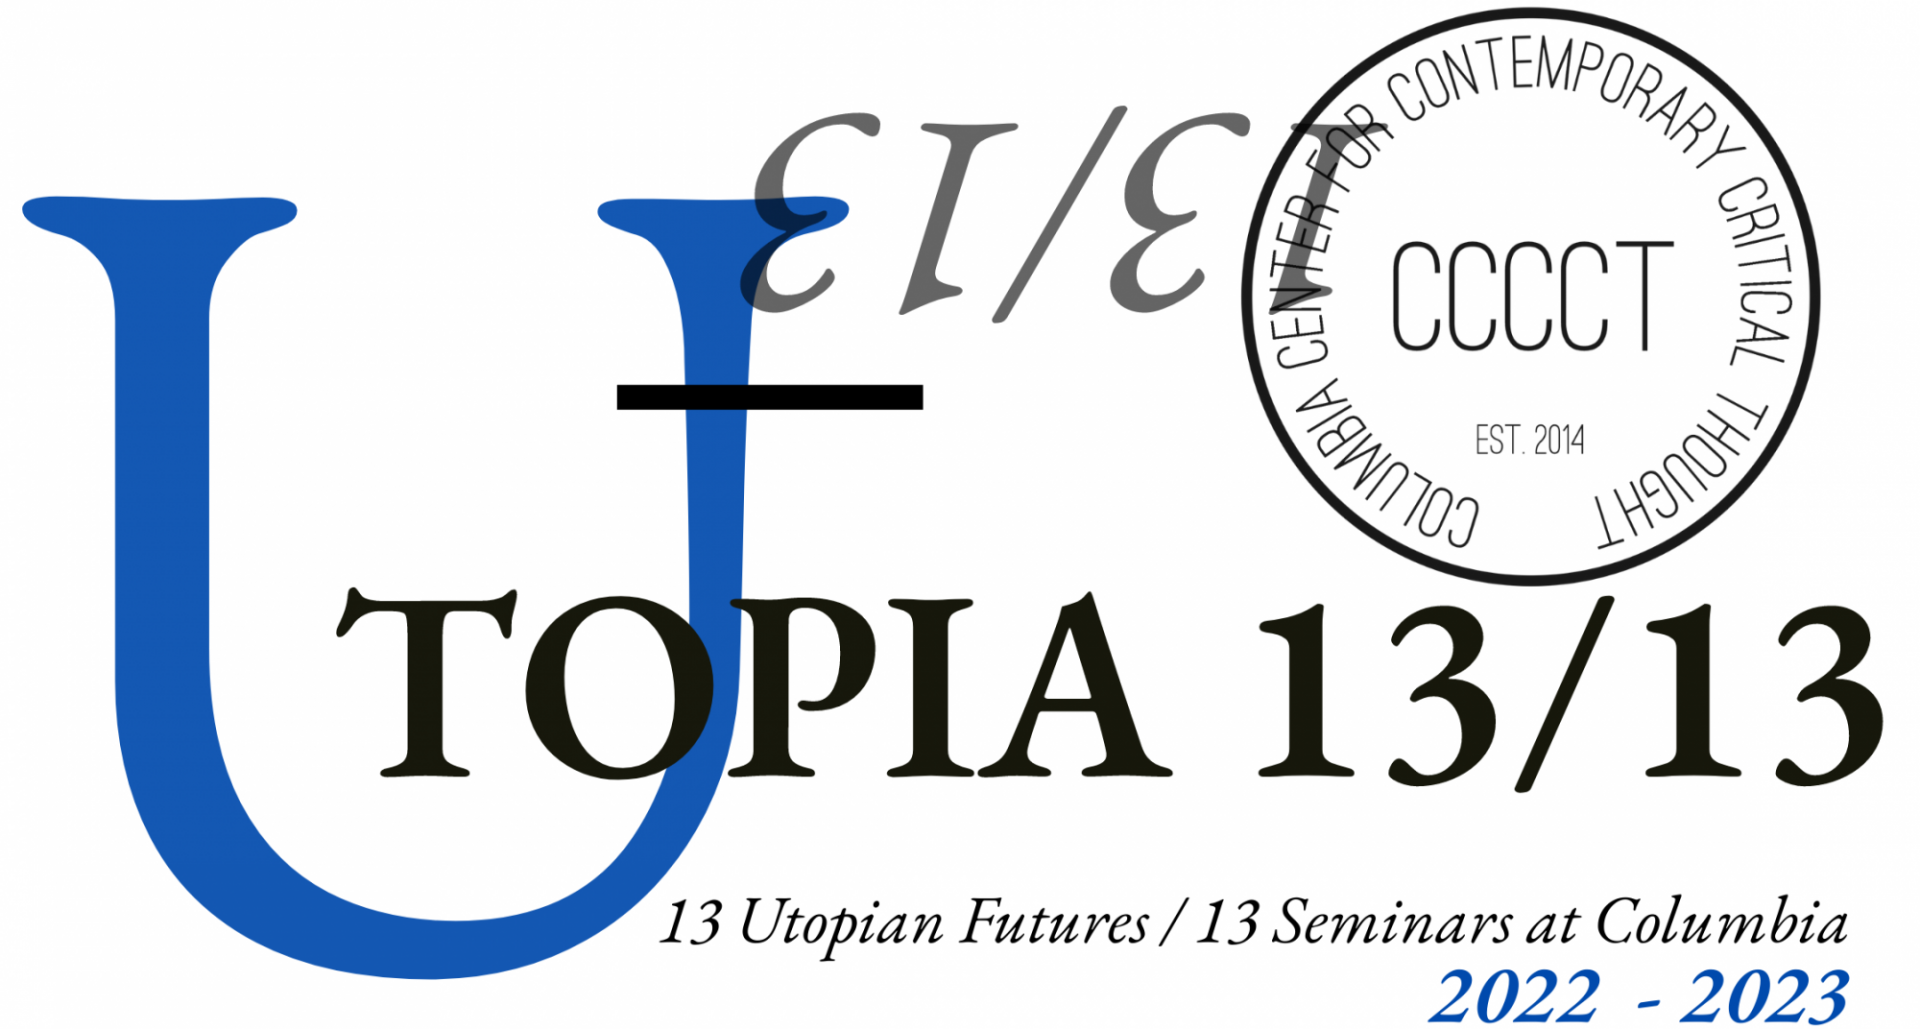 Utopia 13/13 poster with blue first letter and the years 2022-2023, and "13 Utopia Futures / 13 Seminars at Columbia." Poster includes CCCCT logo.